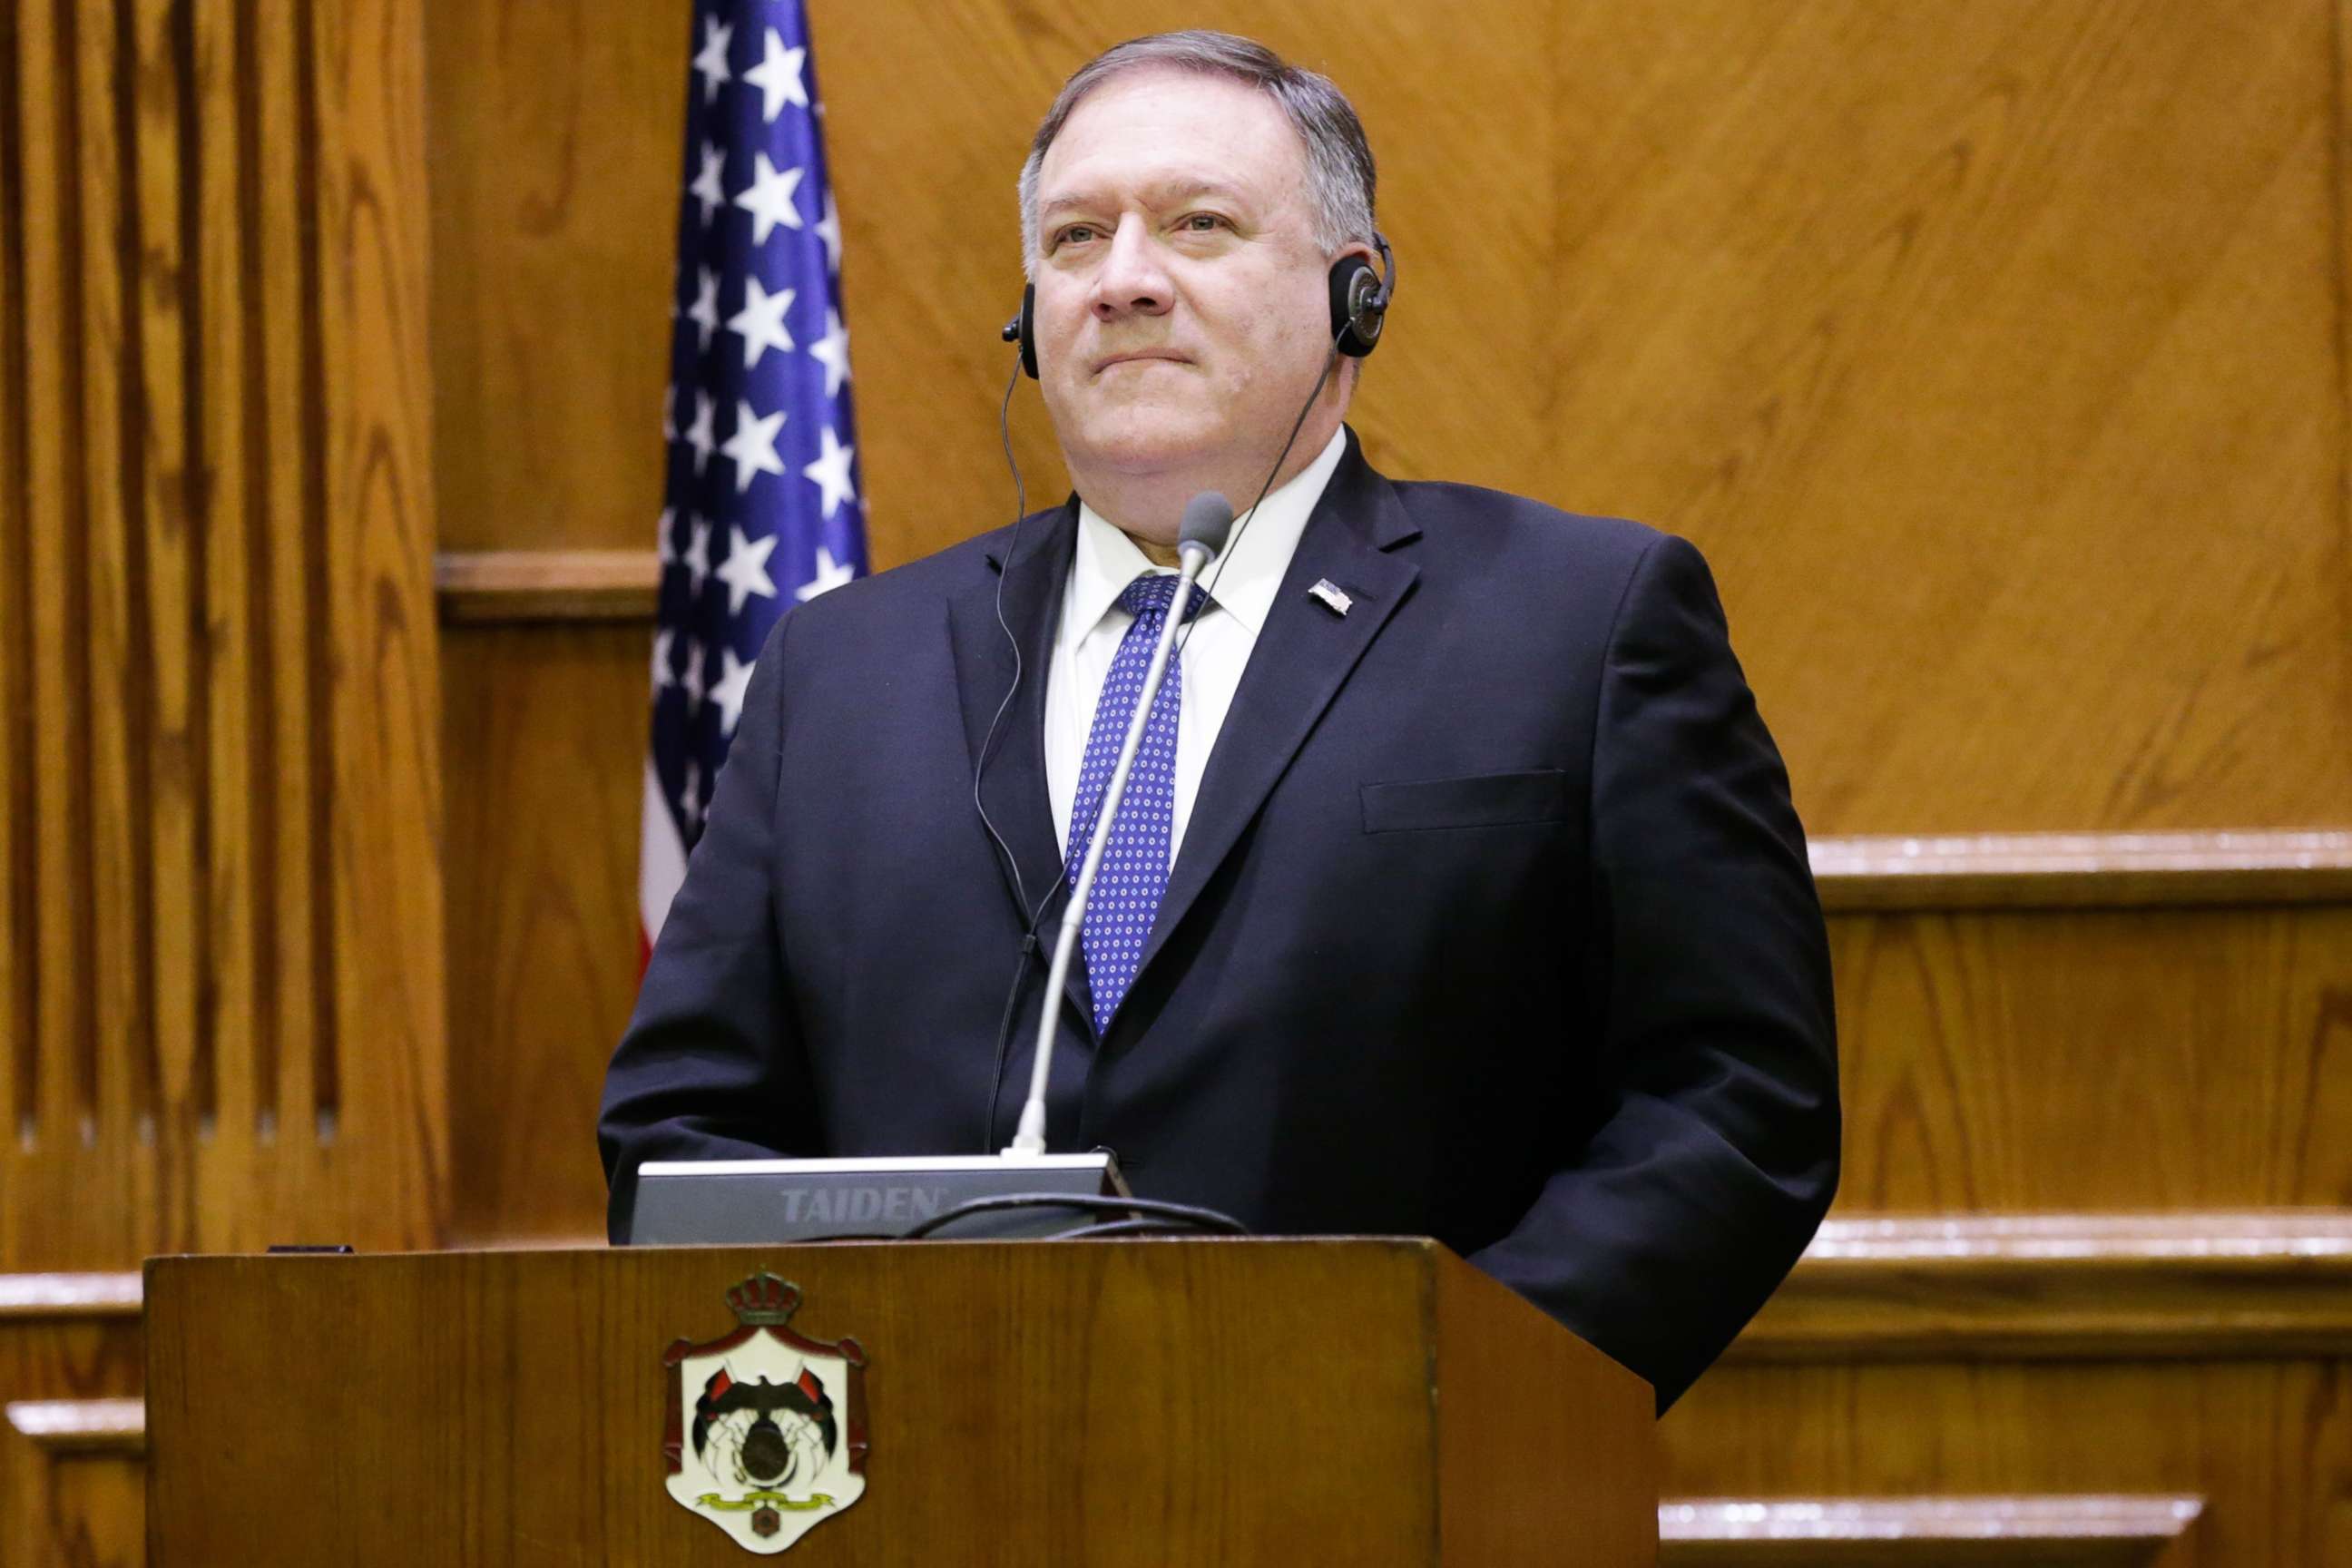 PHOTO: Secretary of State Mike Pompeo during a joint press conference with Minister of Foreign Affairs and Expatriates Ayman Safadi, at the Foreign Ministry, in Amman, Jordan, Jan. 
8, 2019.